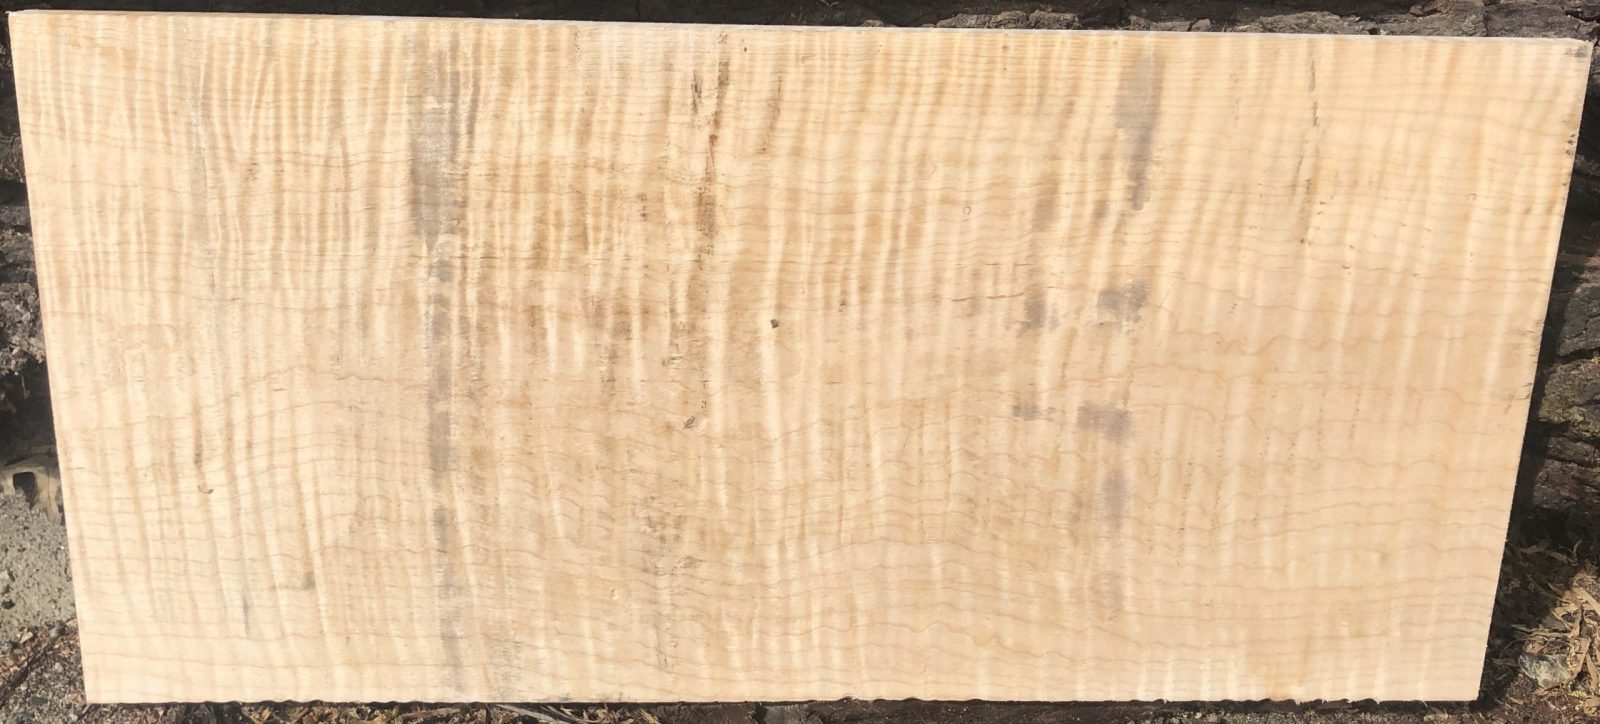 Curly Maple Raw Wood Veneer Sheets 6 x 24 inches 1/42nd          8632-20 